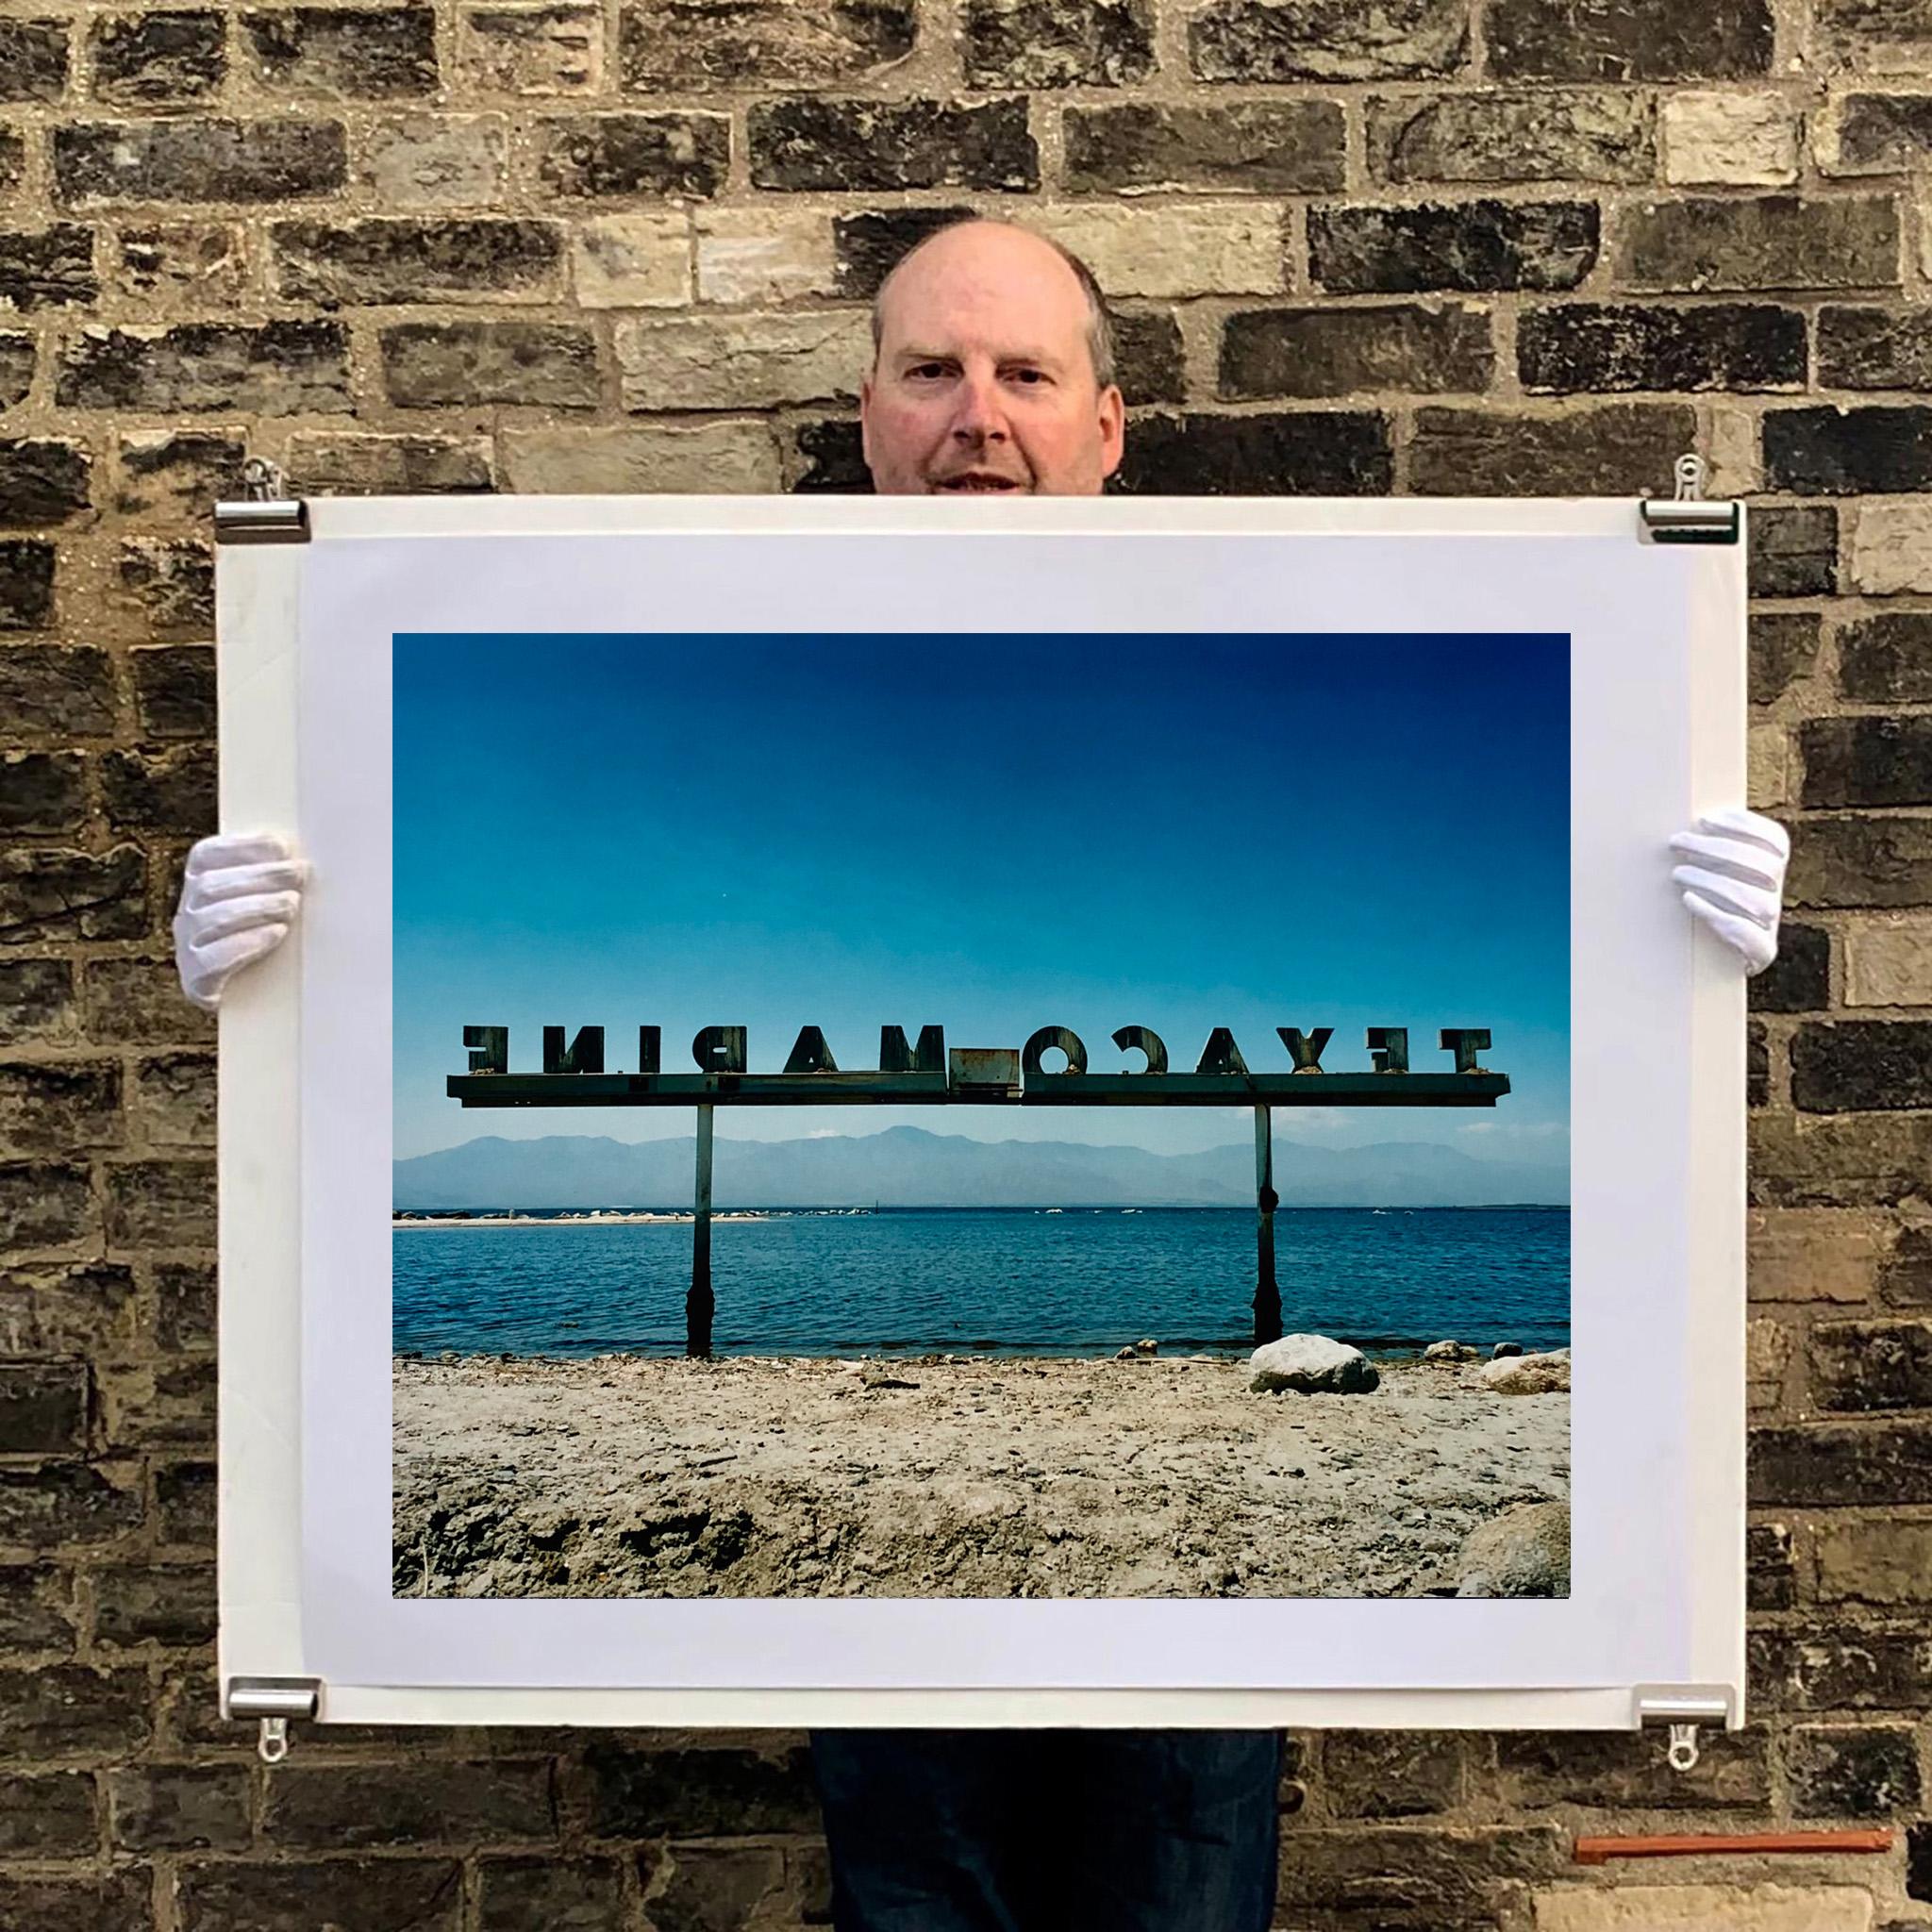 Texaco Marine, photograph from Richard Heeps 'Salton Sea' Collection. 
This large advertising sign on the bank of California's largest marina, once a popular celebrity mooring point. The sign is no longer there so Richard has captured the iconic